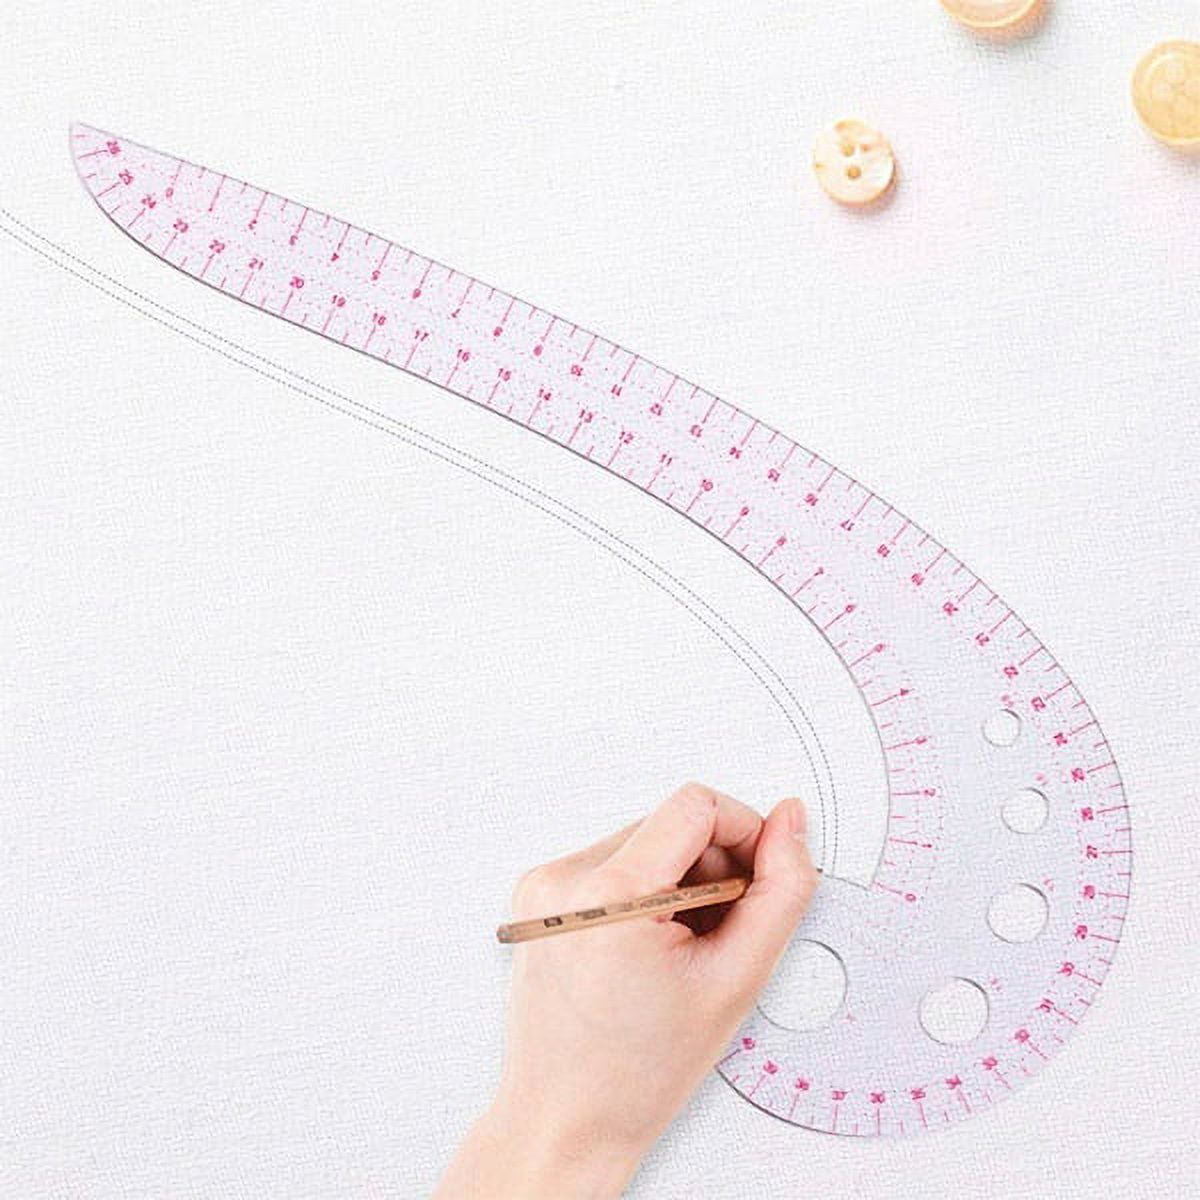 Willstar Fashion Clear Metric Sewing Ruler Set, French Curve Pattern Making Ruler Kit for Beginners Tailors Designers (7-Piece Set), Size: 7pcs, White